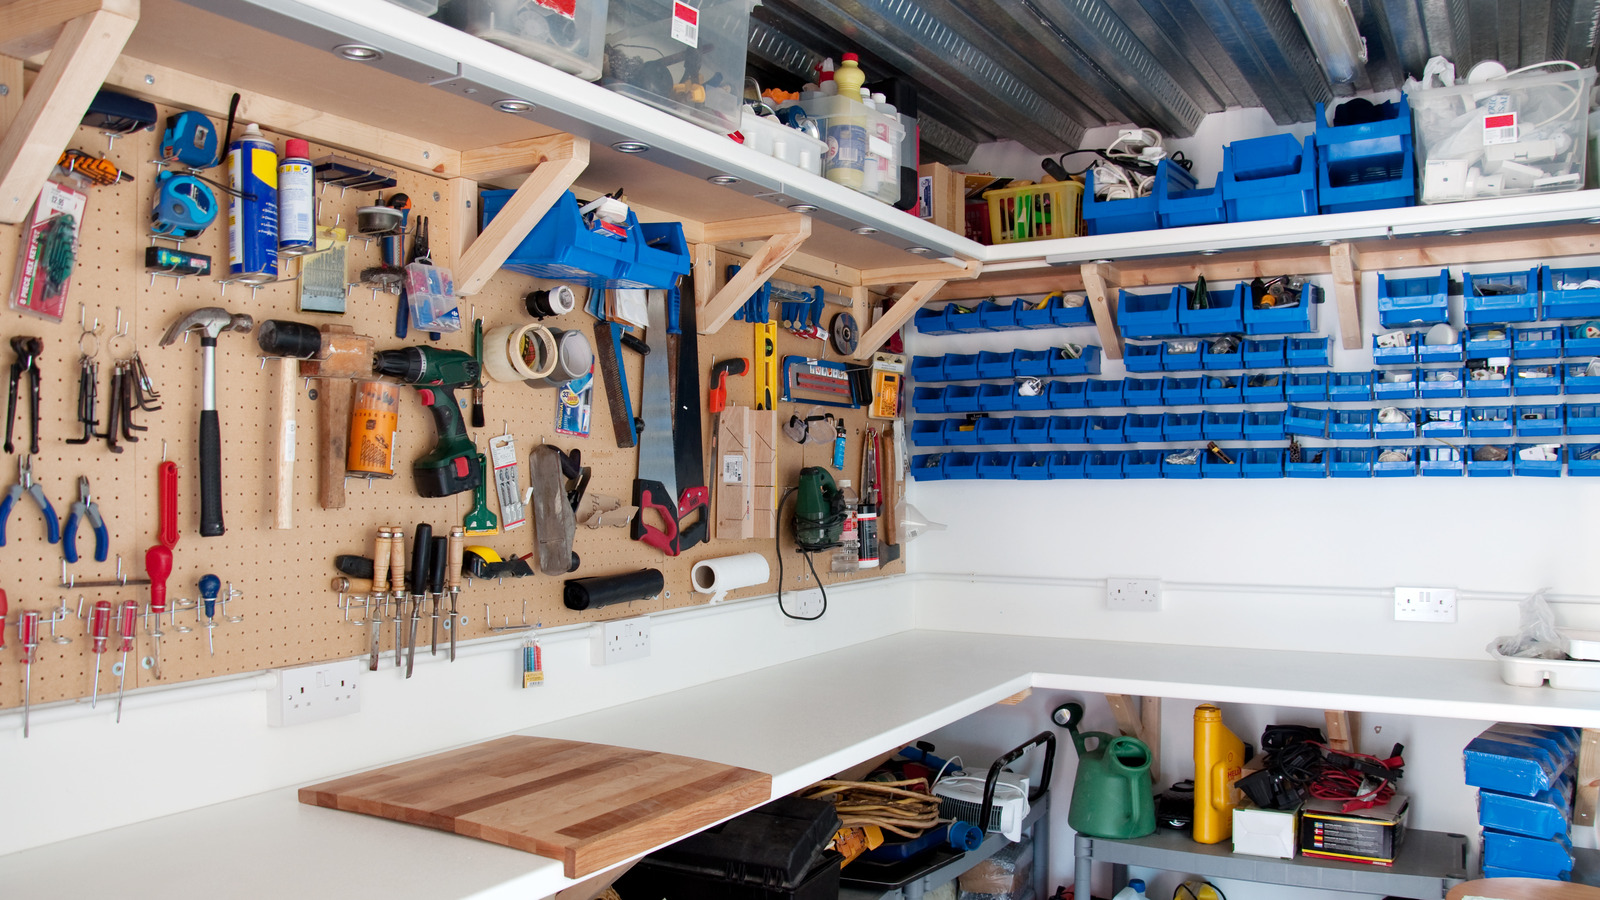 https://www.housedigest.com/img/gallery/garage-storage-ideas-that-will-inspire-the-handyperson-in-you/l-intro-1661765347.jpg